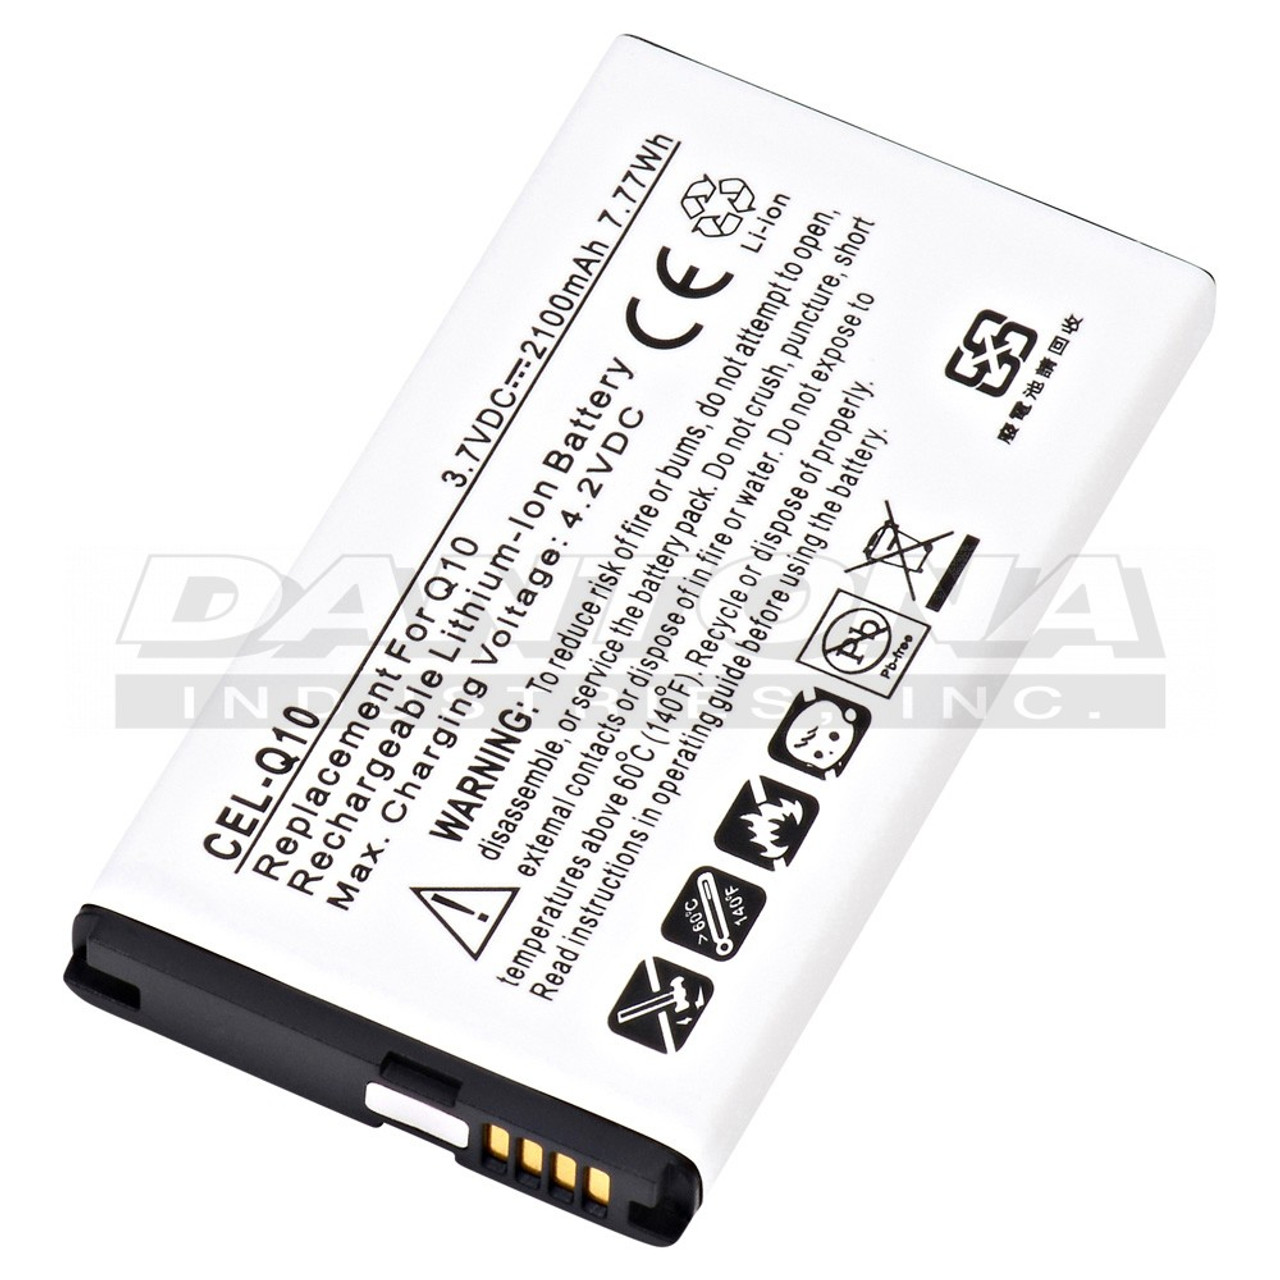 BLACKBERRY Q10 N-X1 REPLACEMENT BATTERY - Battery Warehouse